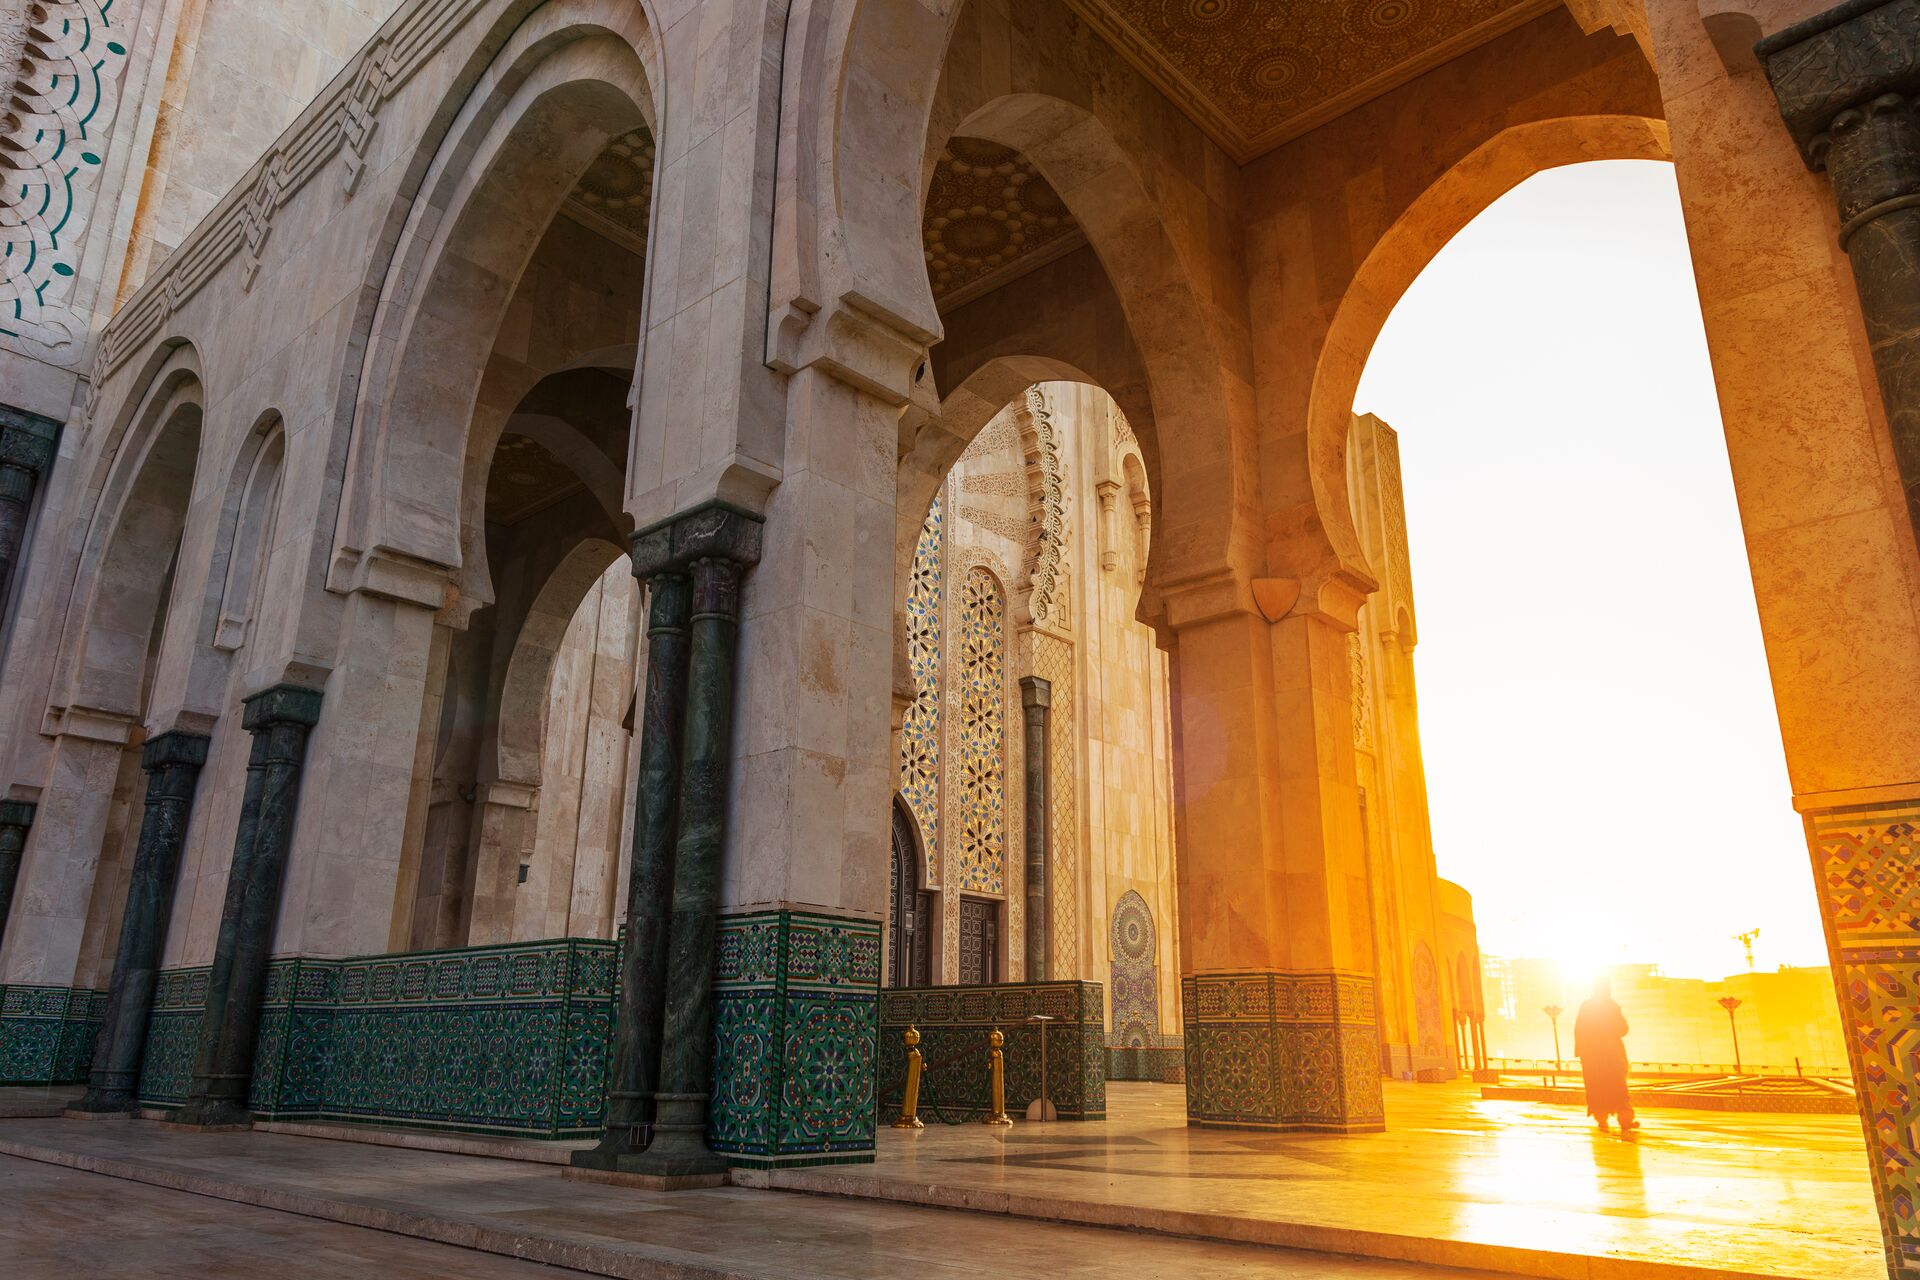 Hassan II Mosque in Casablanca, showing whits stone pillars and archways with the sun in the background